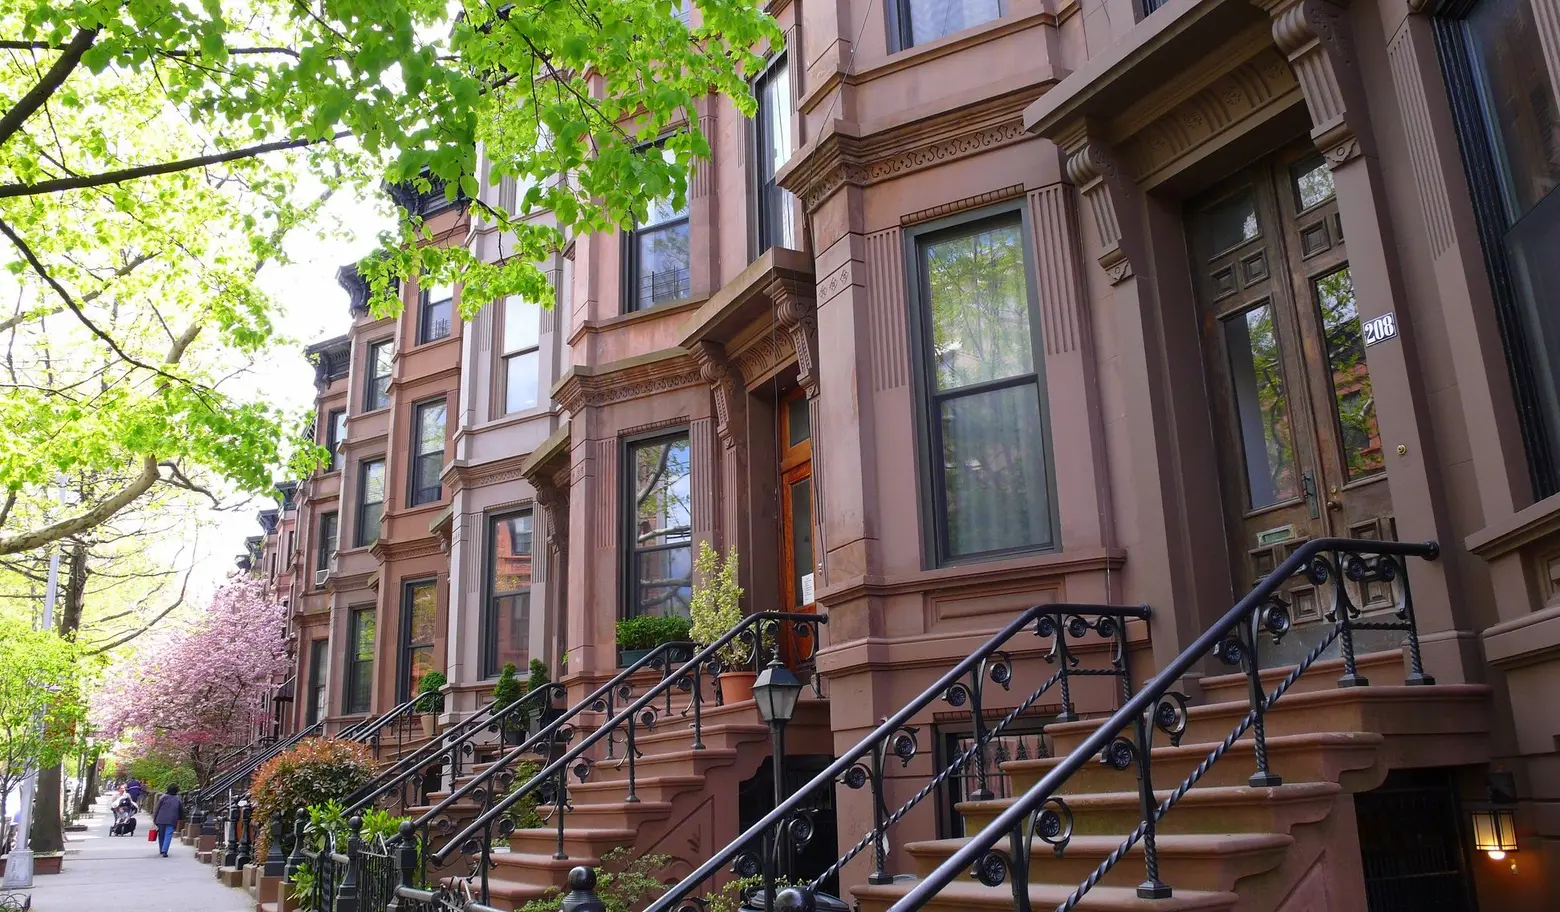 Lottery opens for 300-name waitlist for apartments across Brooklyn’s brownstone belt